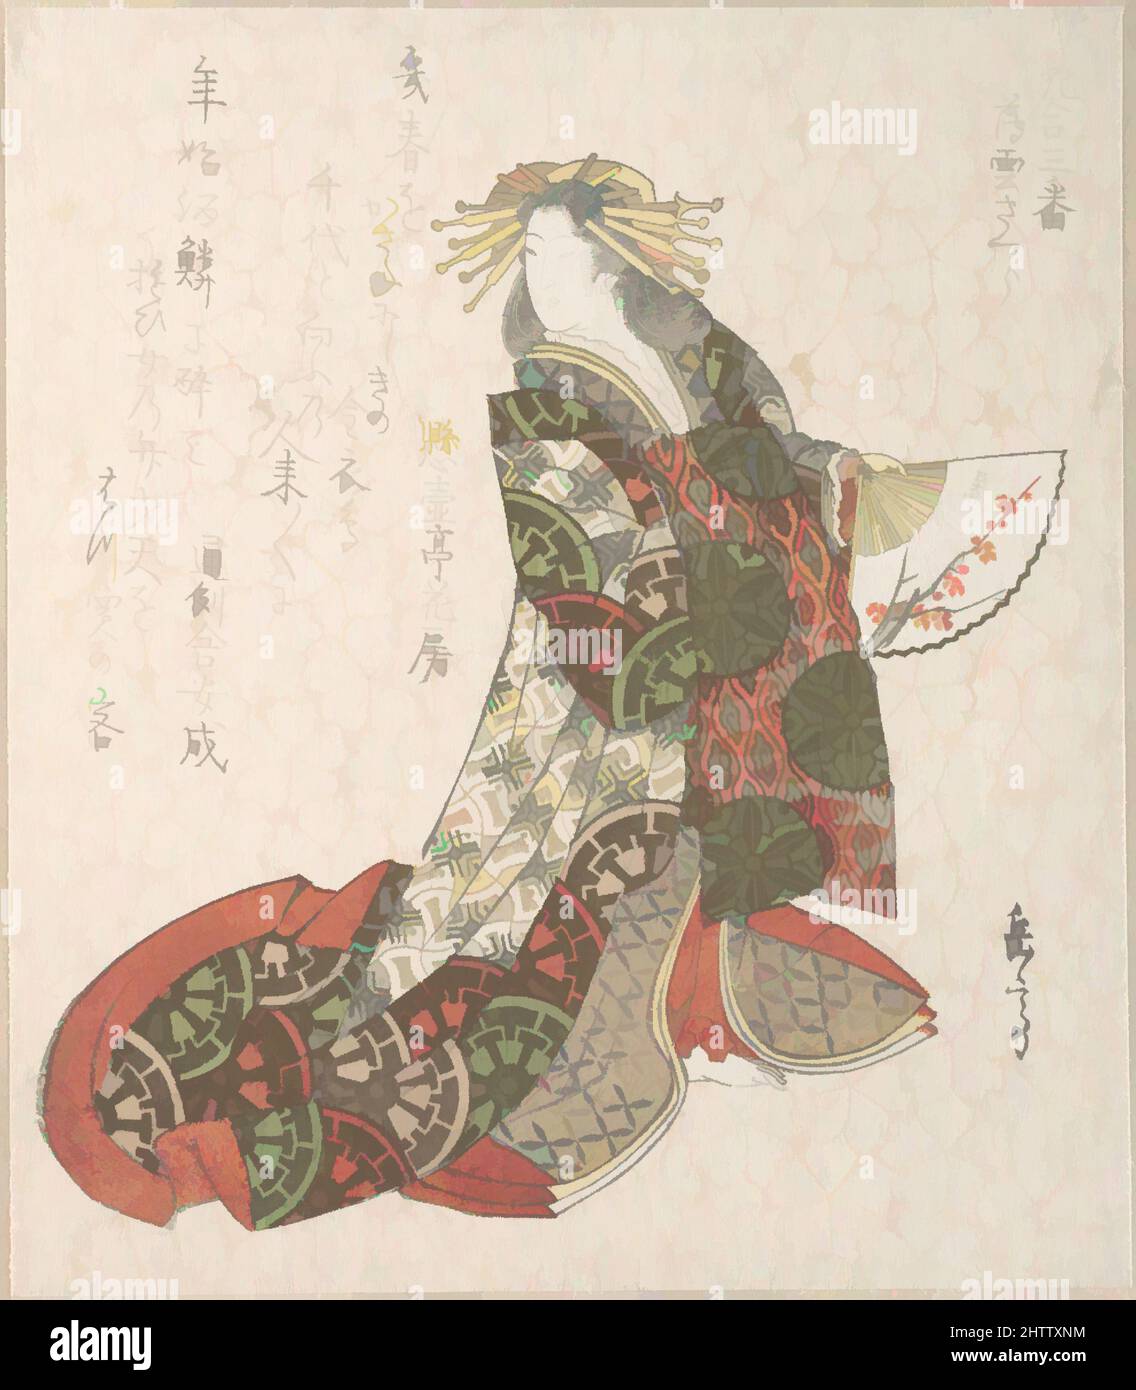 Art inspired by Courtesan Usugumo, 19th century, Japan, Polychrome woodblock print (surimono); ink and color on paper, 8 3/16 x 7 1/8 in. (20.8 x 18.1 cm), Prints, Yashima Gakutei (Japanese, 1786?–1868, Classic works modernized by Artotop with a splash of modernity. Shapes, color and value, eye-catching visual impact on art. Emotions through freedom of artworks in a contemporary way. A timeless message pursuing a wildly creative new direction. Artists turning to the digital medium and creating the Artotop NFT Stock Photo